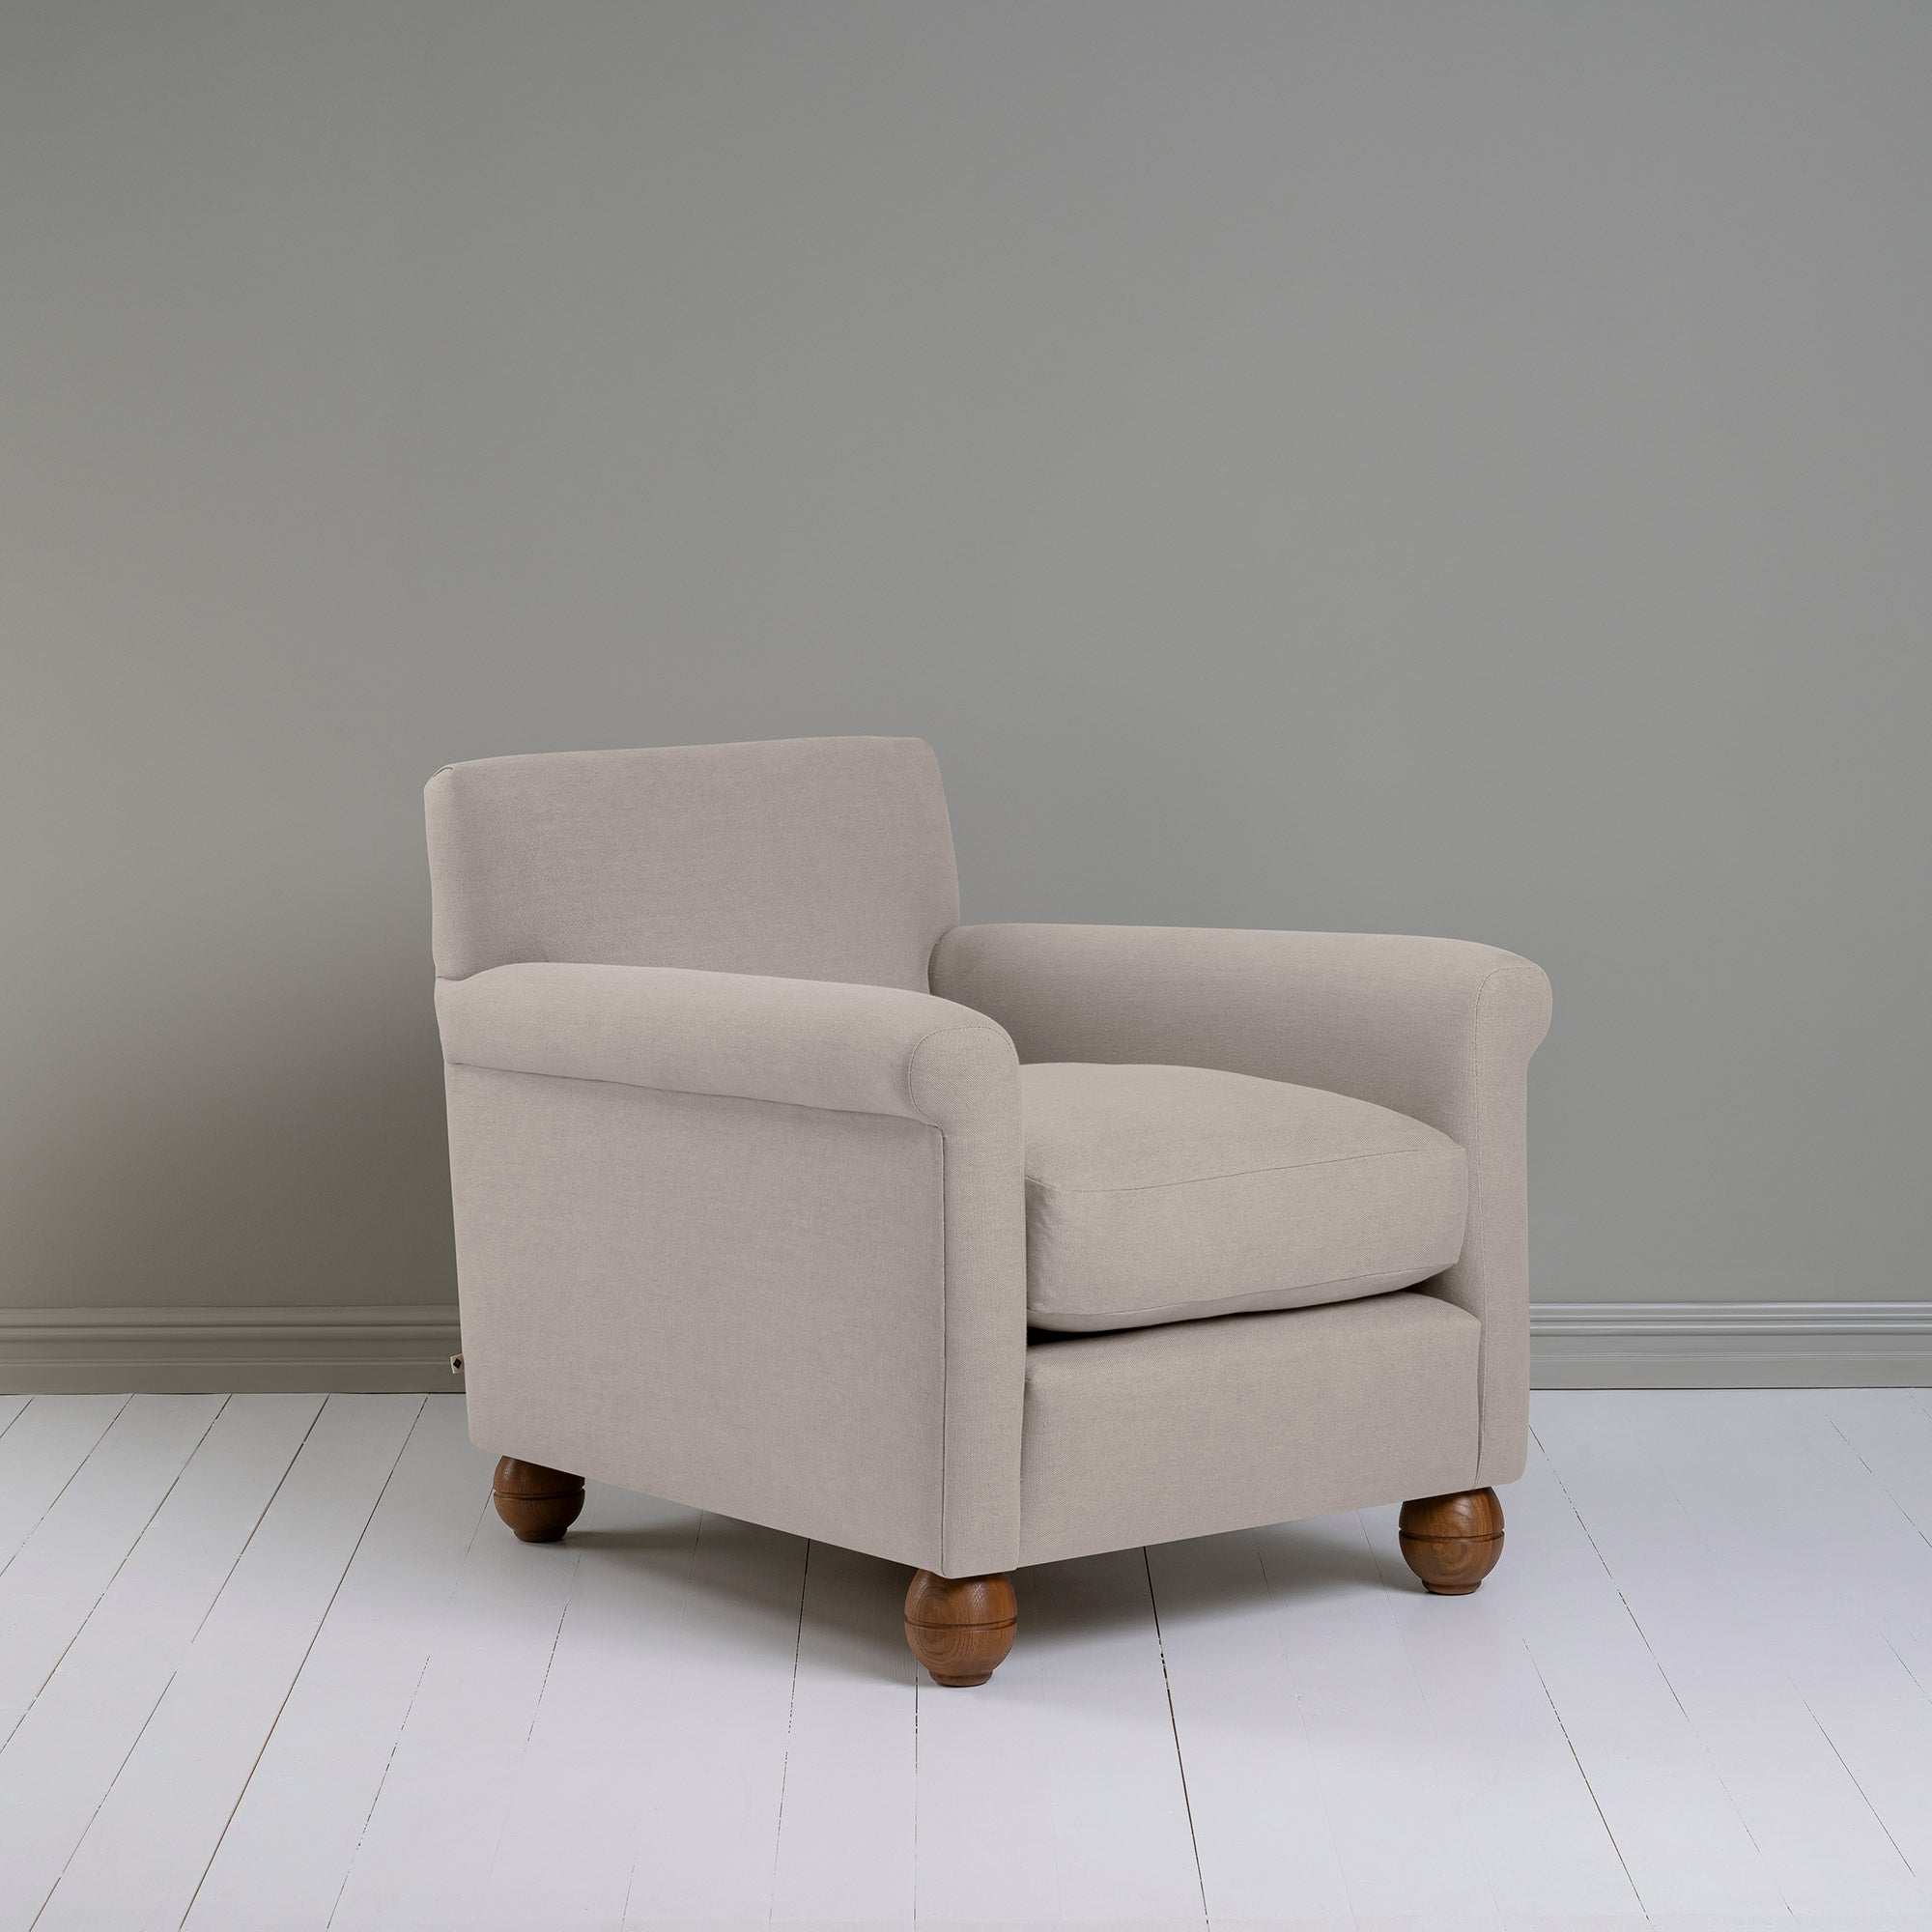  Idler Armchair in Laidback Linen Pearl Grey 